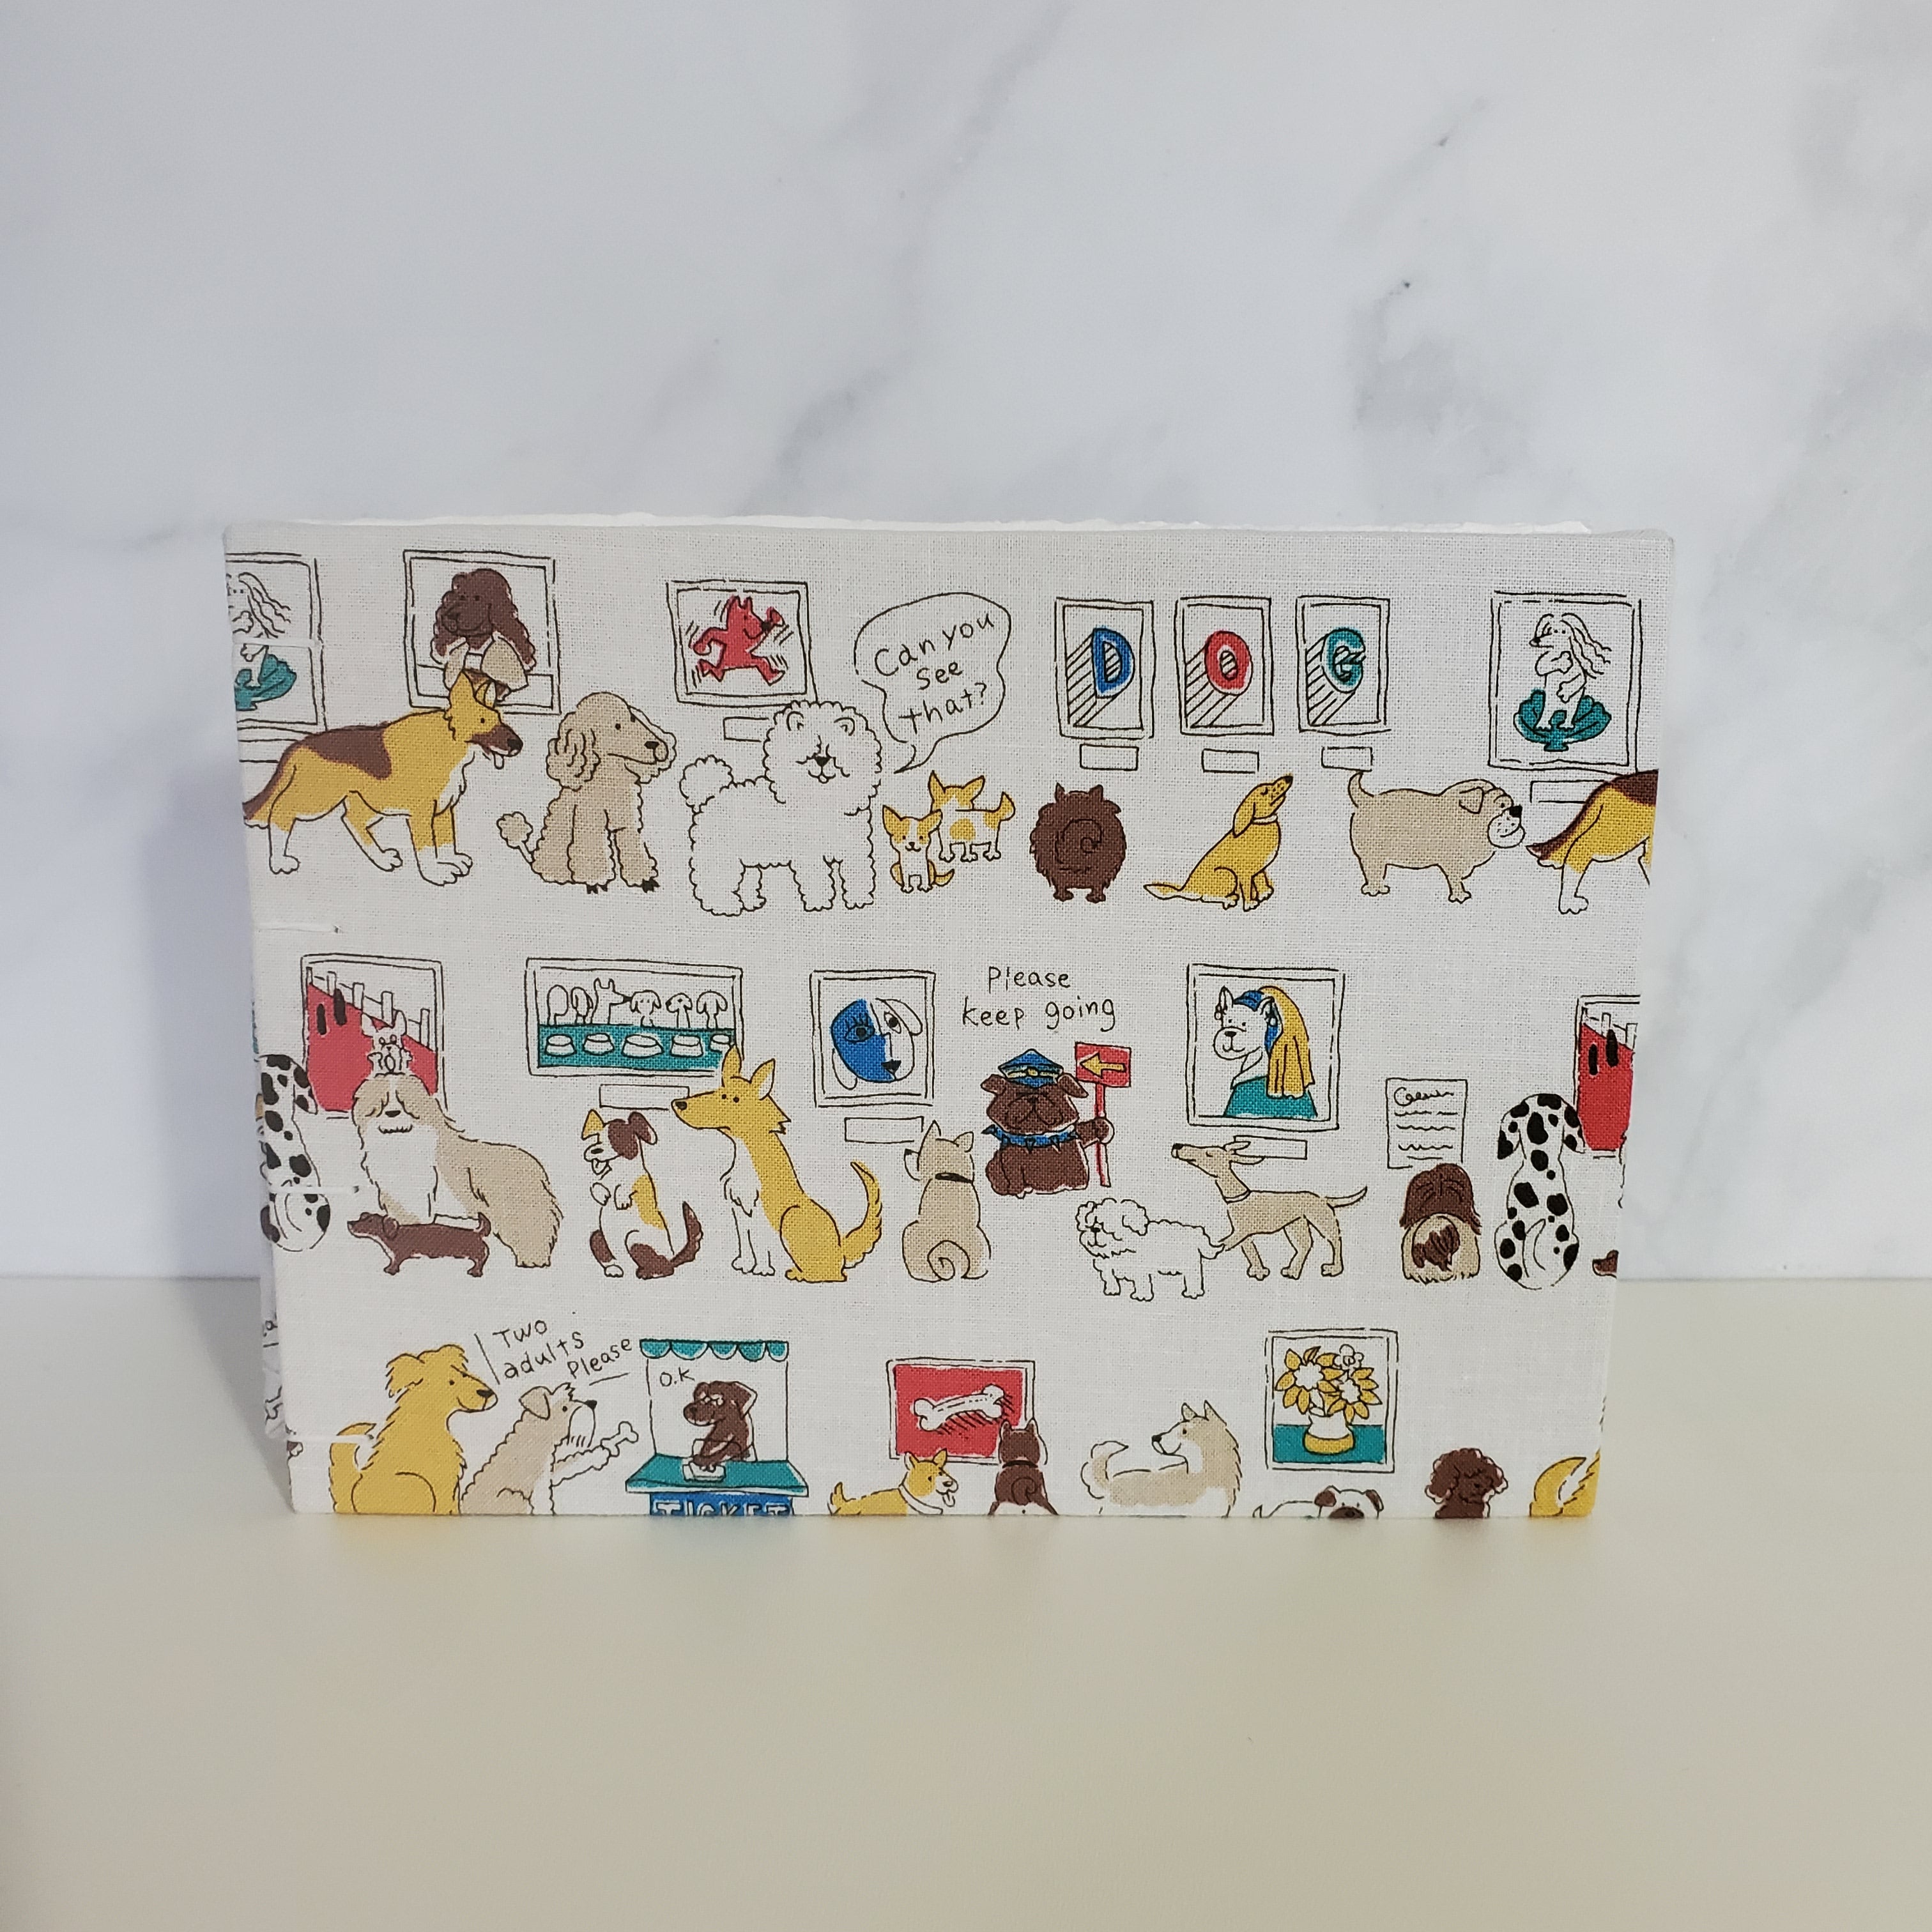 Standard Watercolor Sketchbook | 100% Cotton Paper | Dogs at Gallery in White